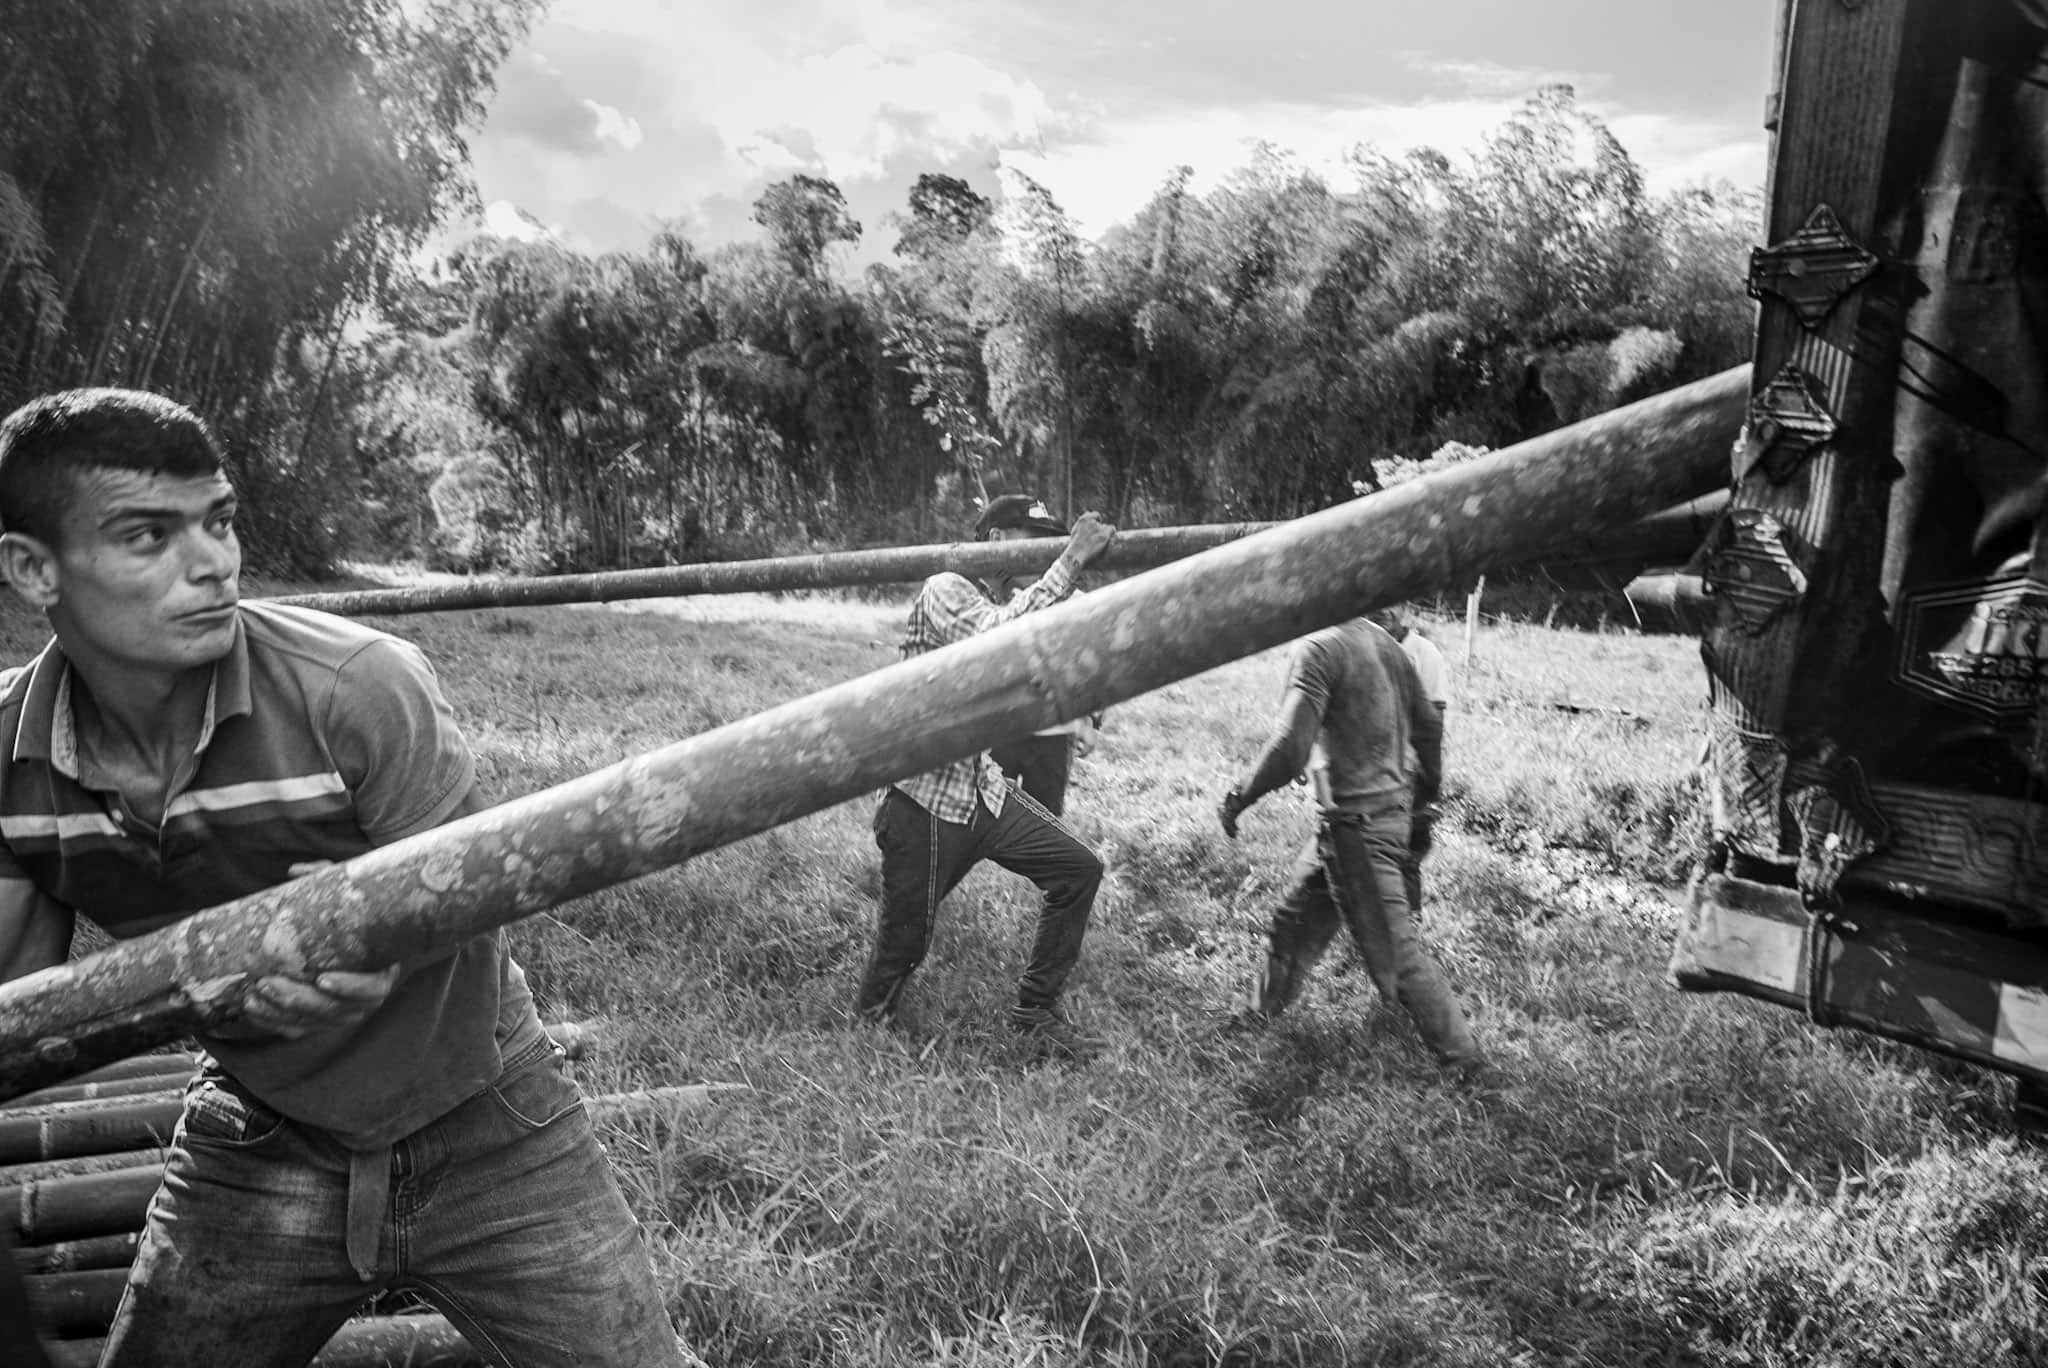 /img/pages/bamboo-textile/colombia/Bamboo_harvesting_in_Colombia.jpg